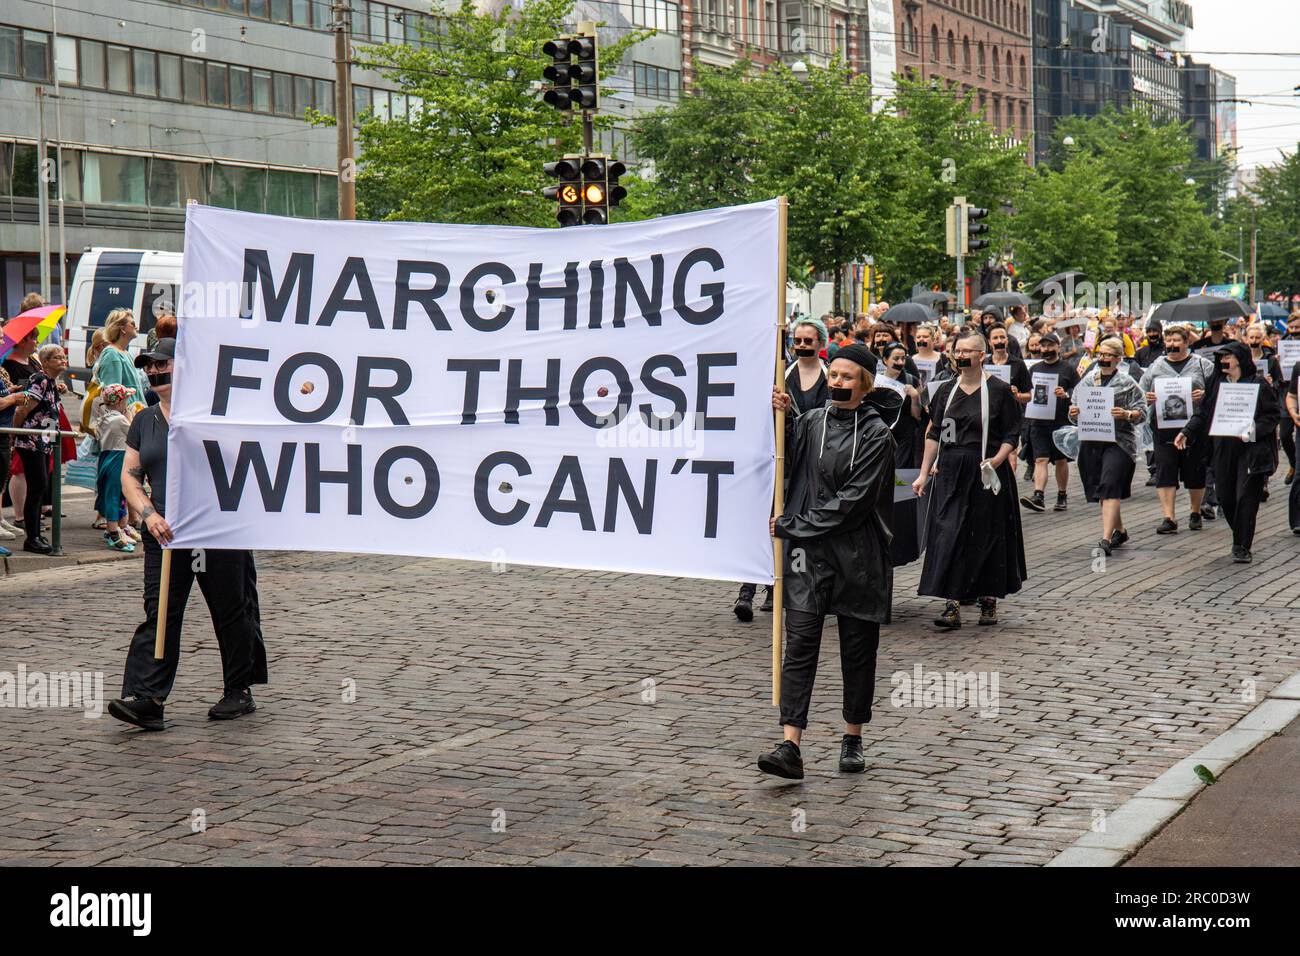 Marching for those who can't. Participants wearing black tape over their mouth in honour of people arrested, tortured or killed for being homosexual. Stock Photo